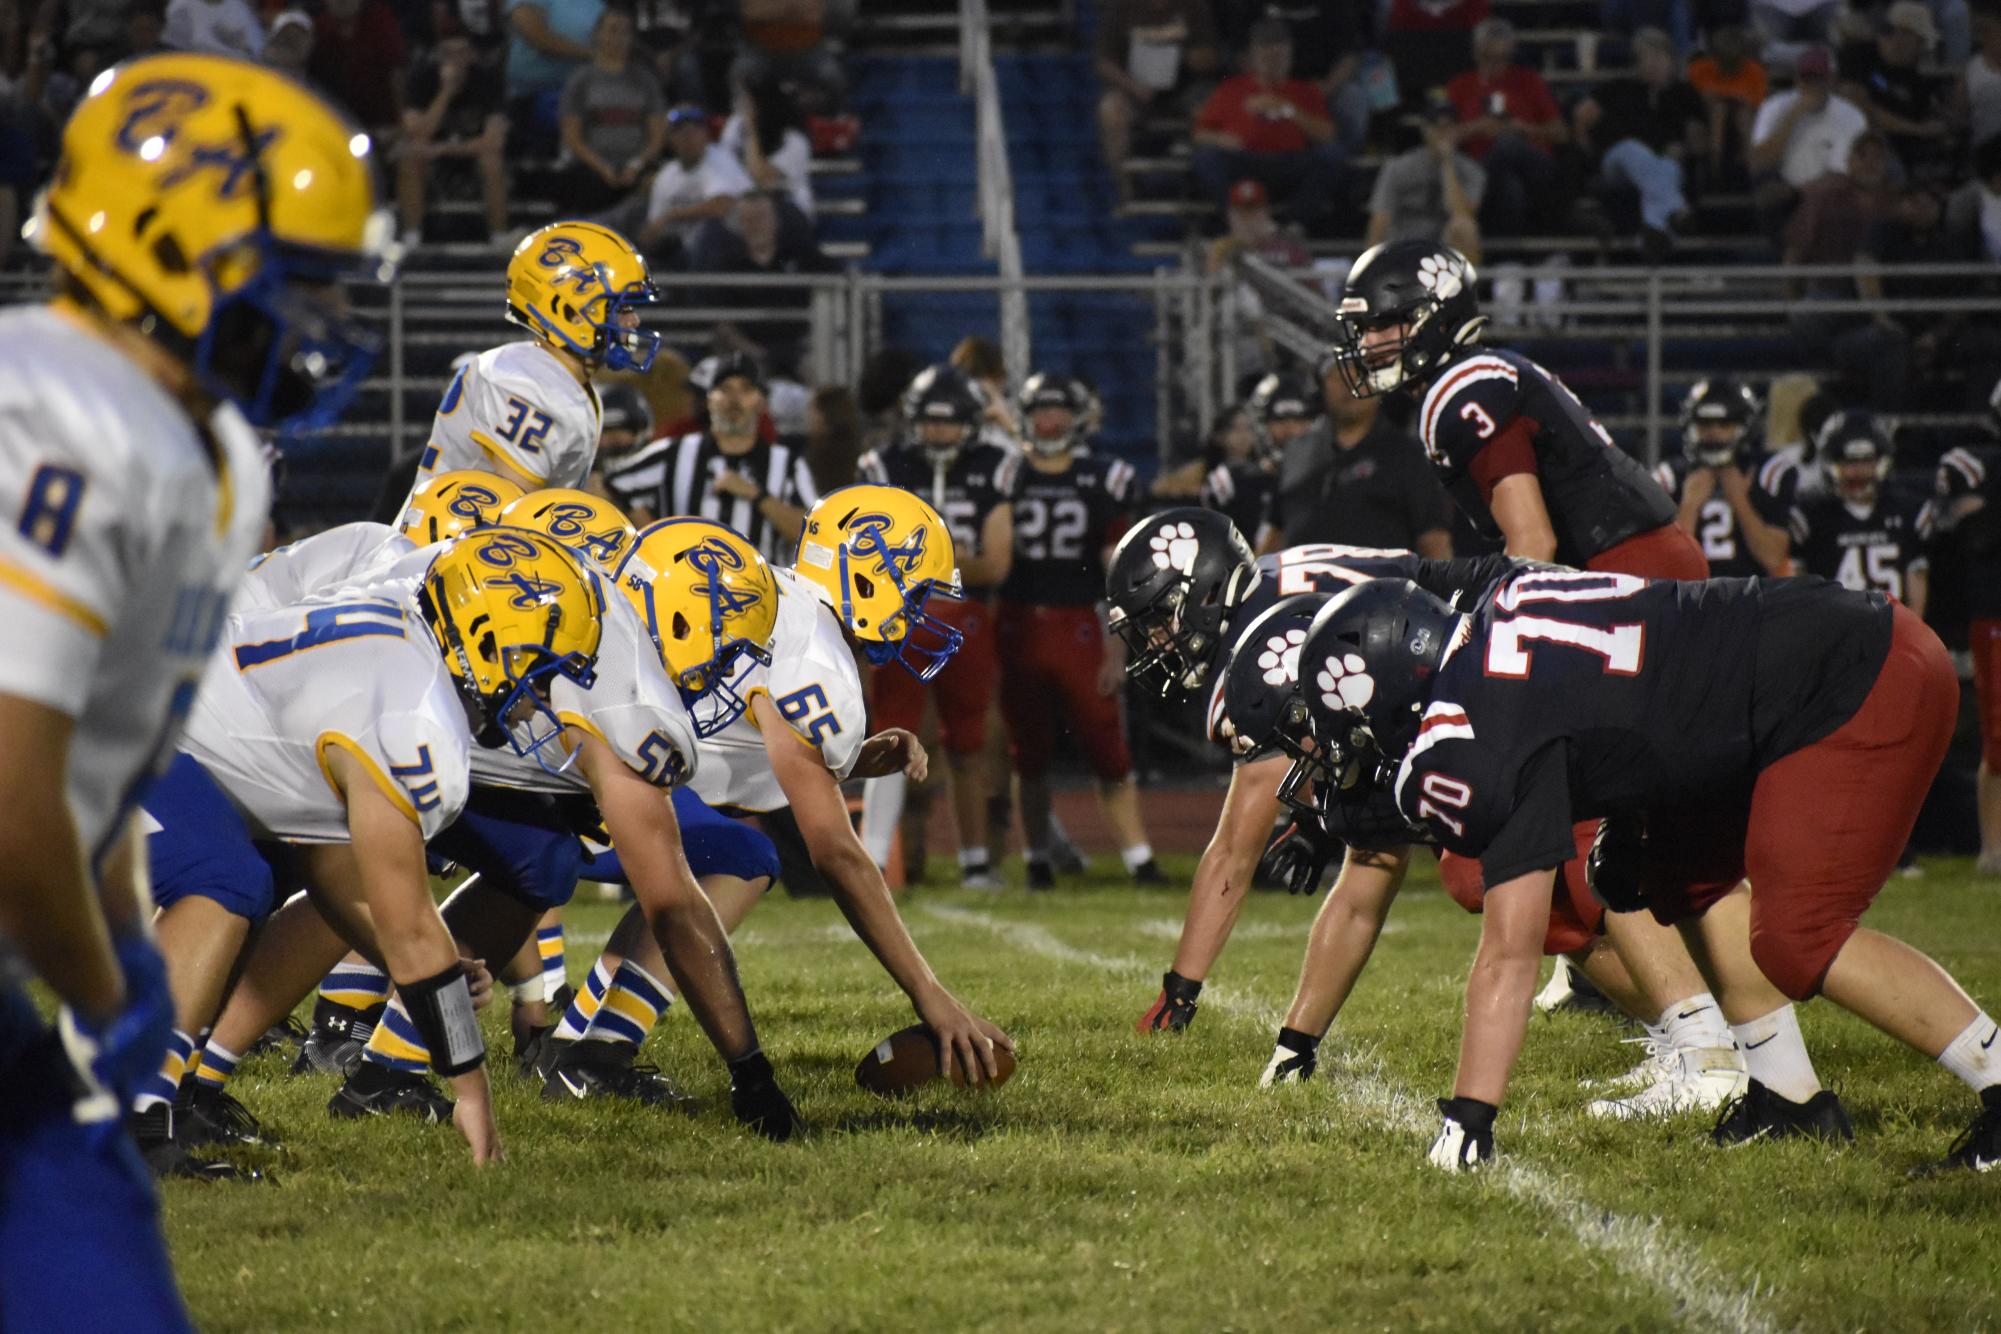 Bellwood gets ready to snap the ball. (Morgan Kienzle)